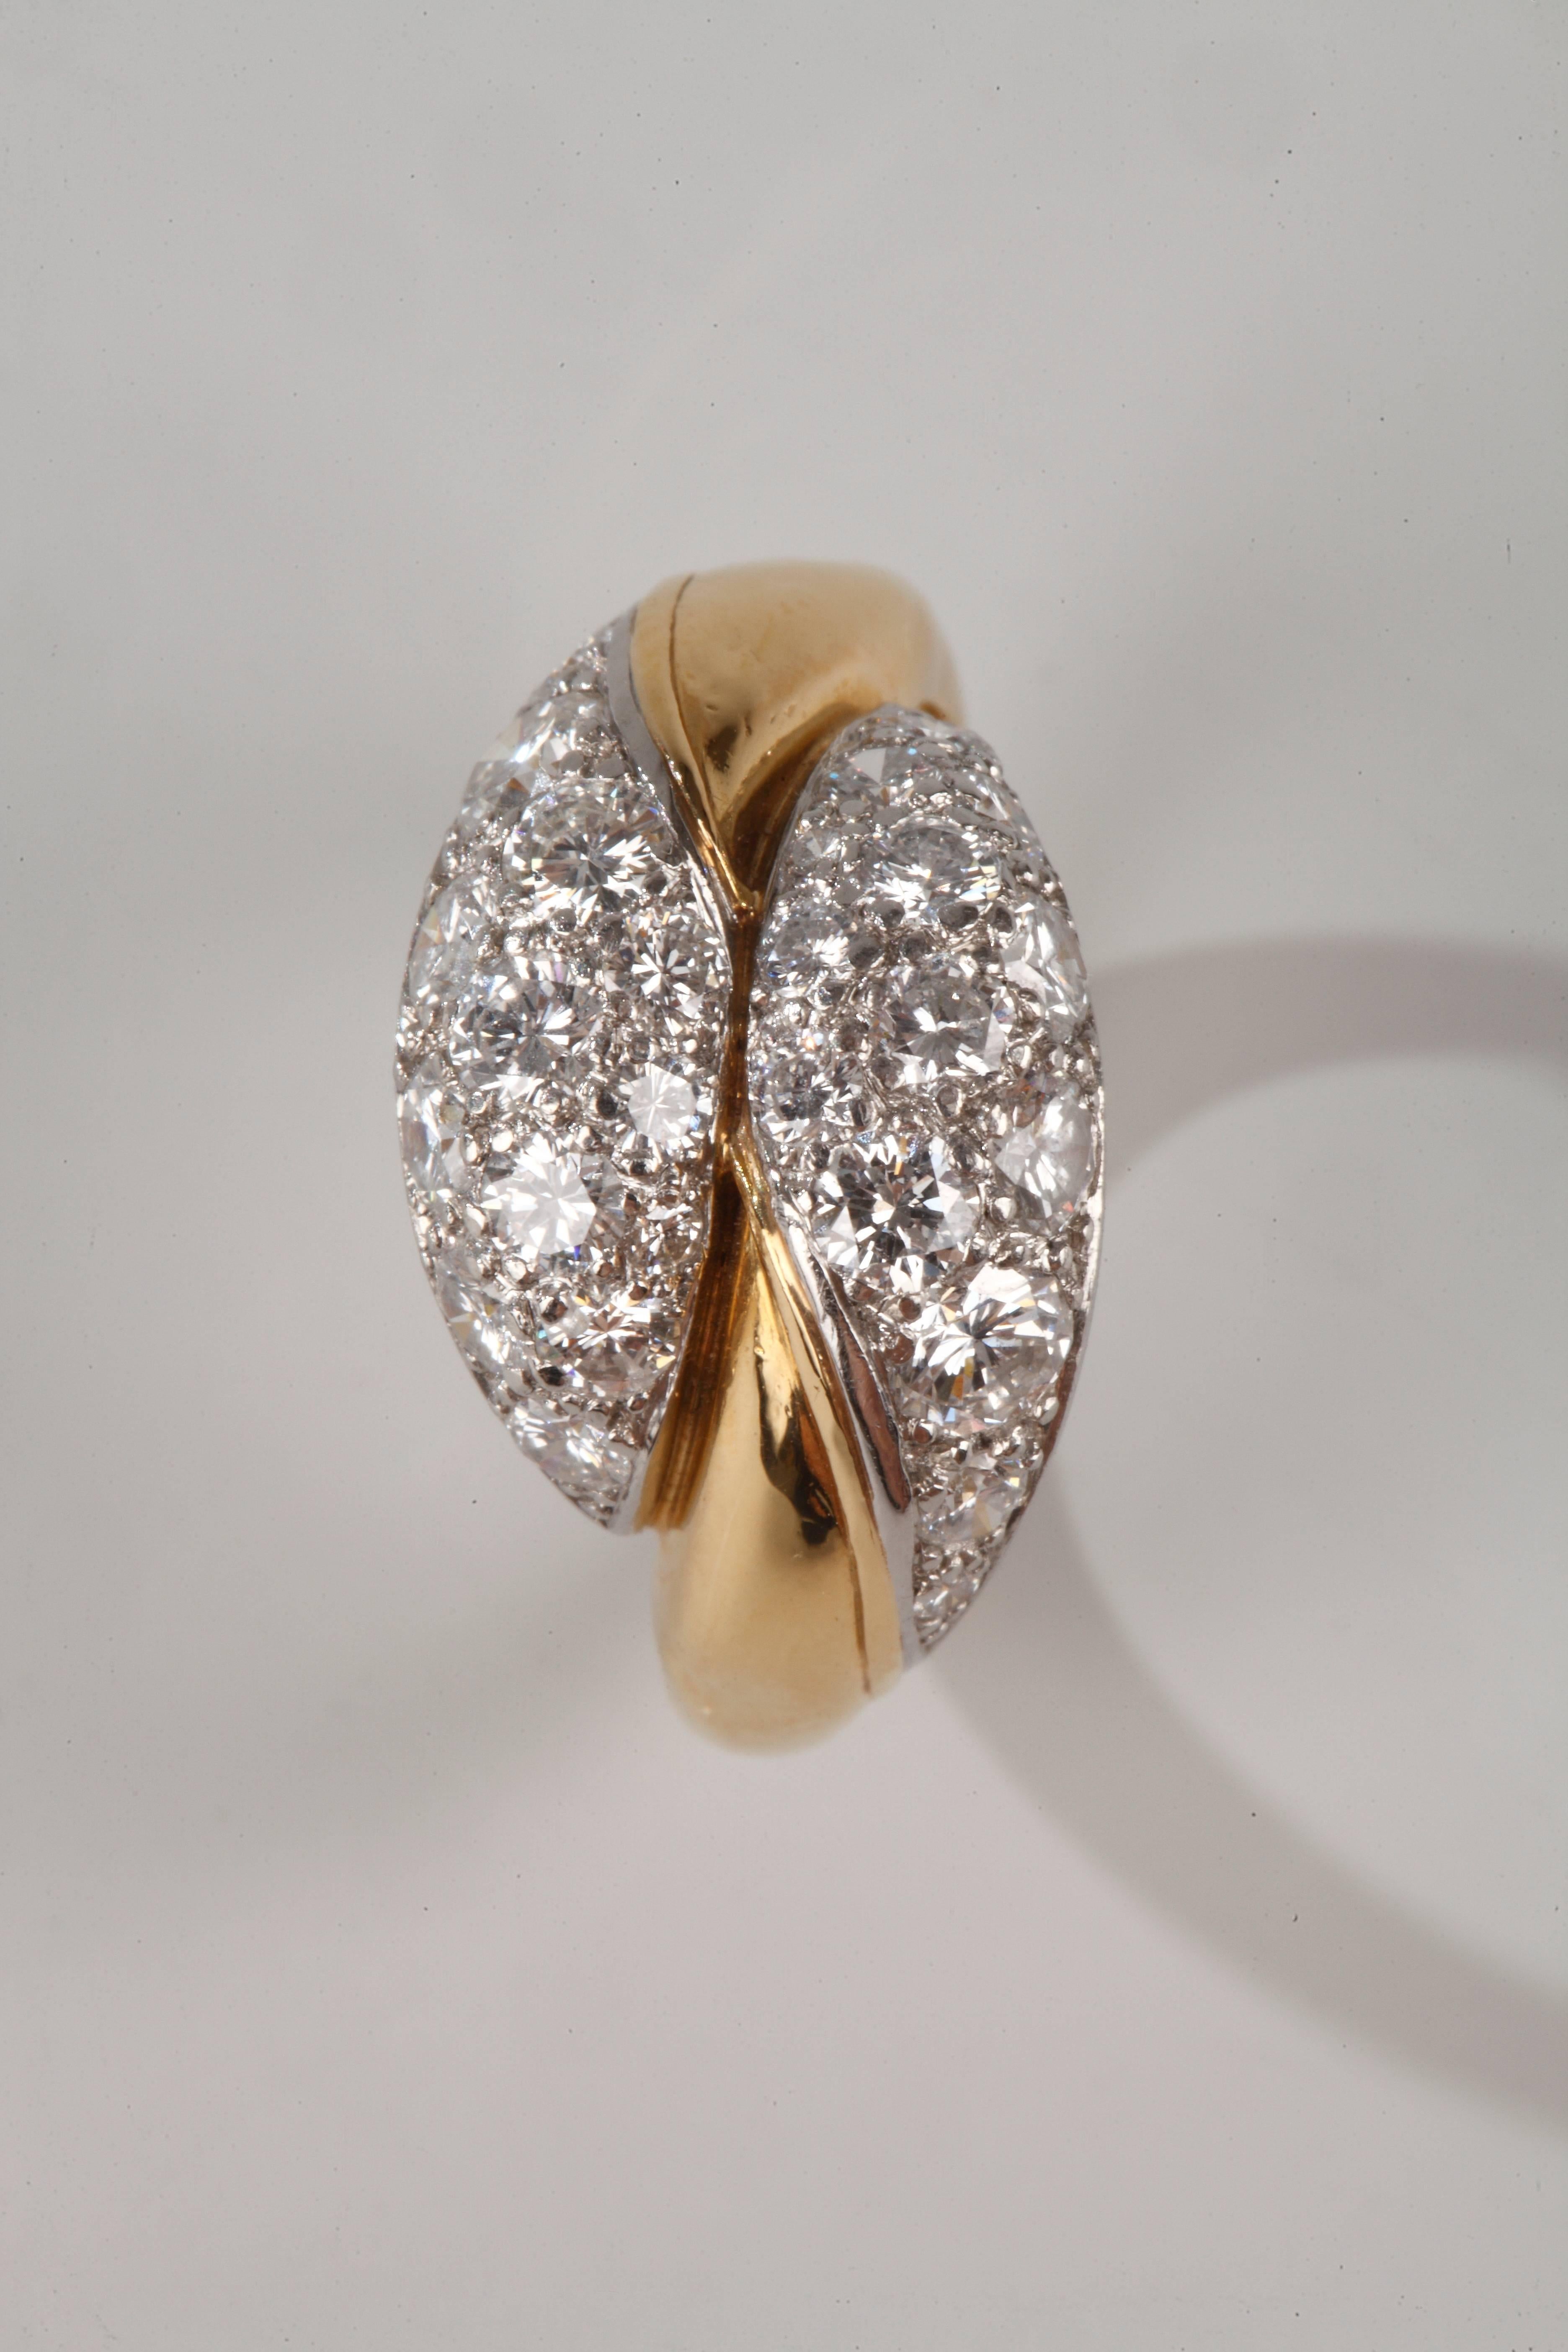 In yellow gold with two motives set with brillant-cut diamonds. Around 1.65ct.
Signed Mauboussin n° 21950
Size : EU : 53  US : 6.5